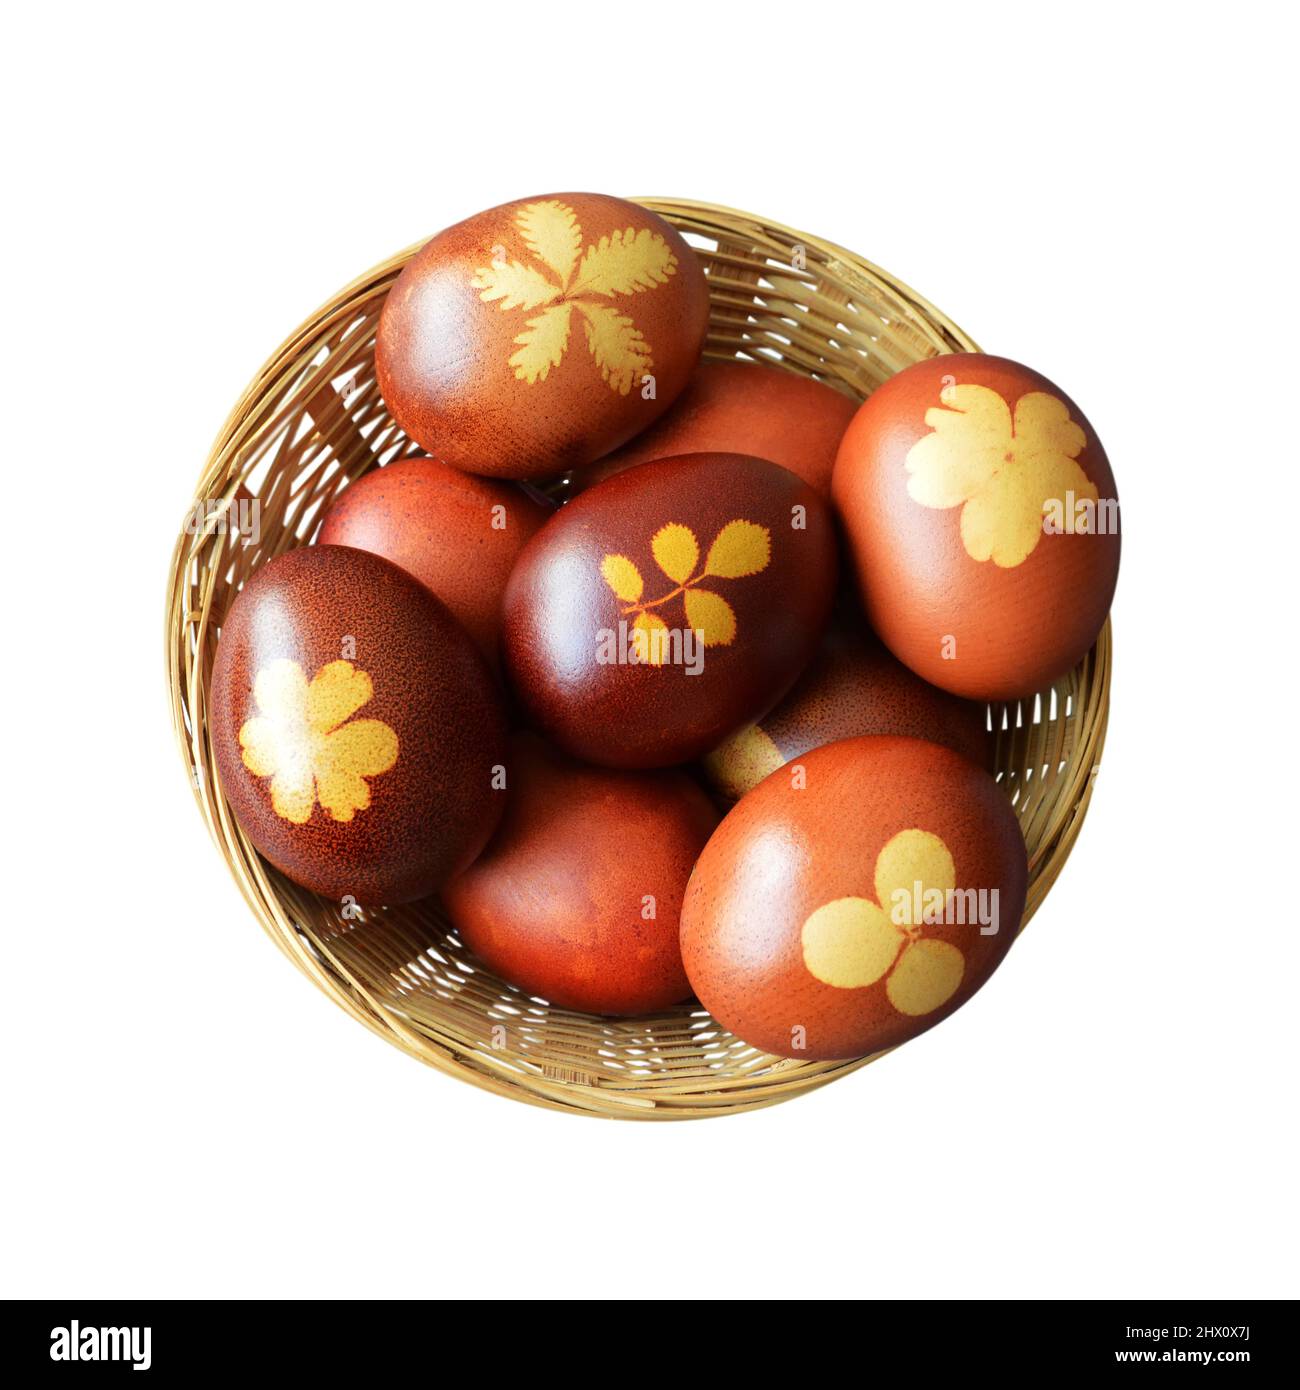 Top view of Easter basket. Naturally dyed eggs with onion skins in basket isolated on white background Stock Photo